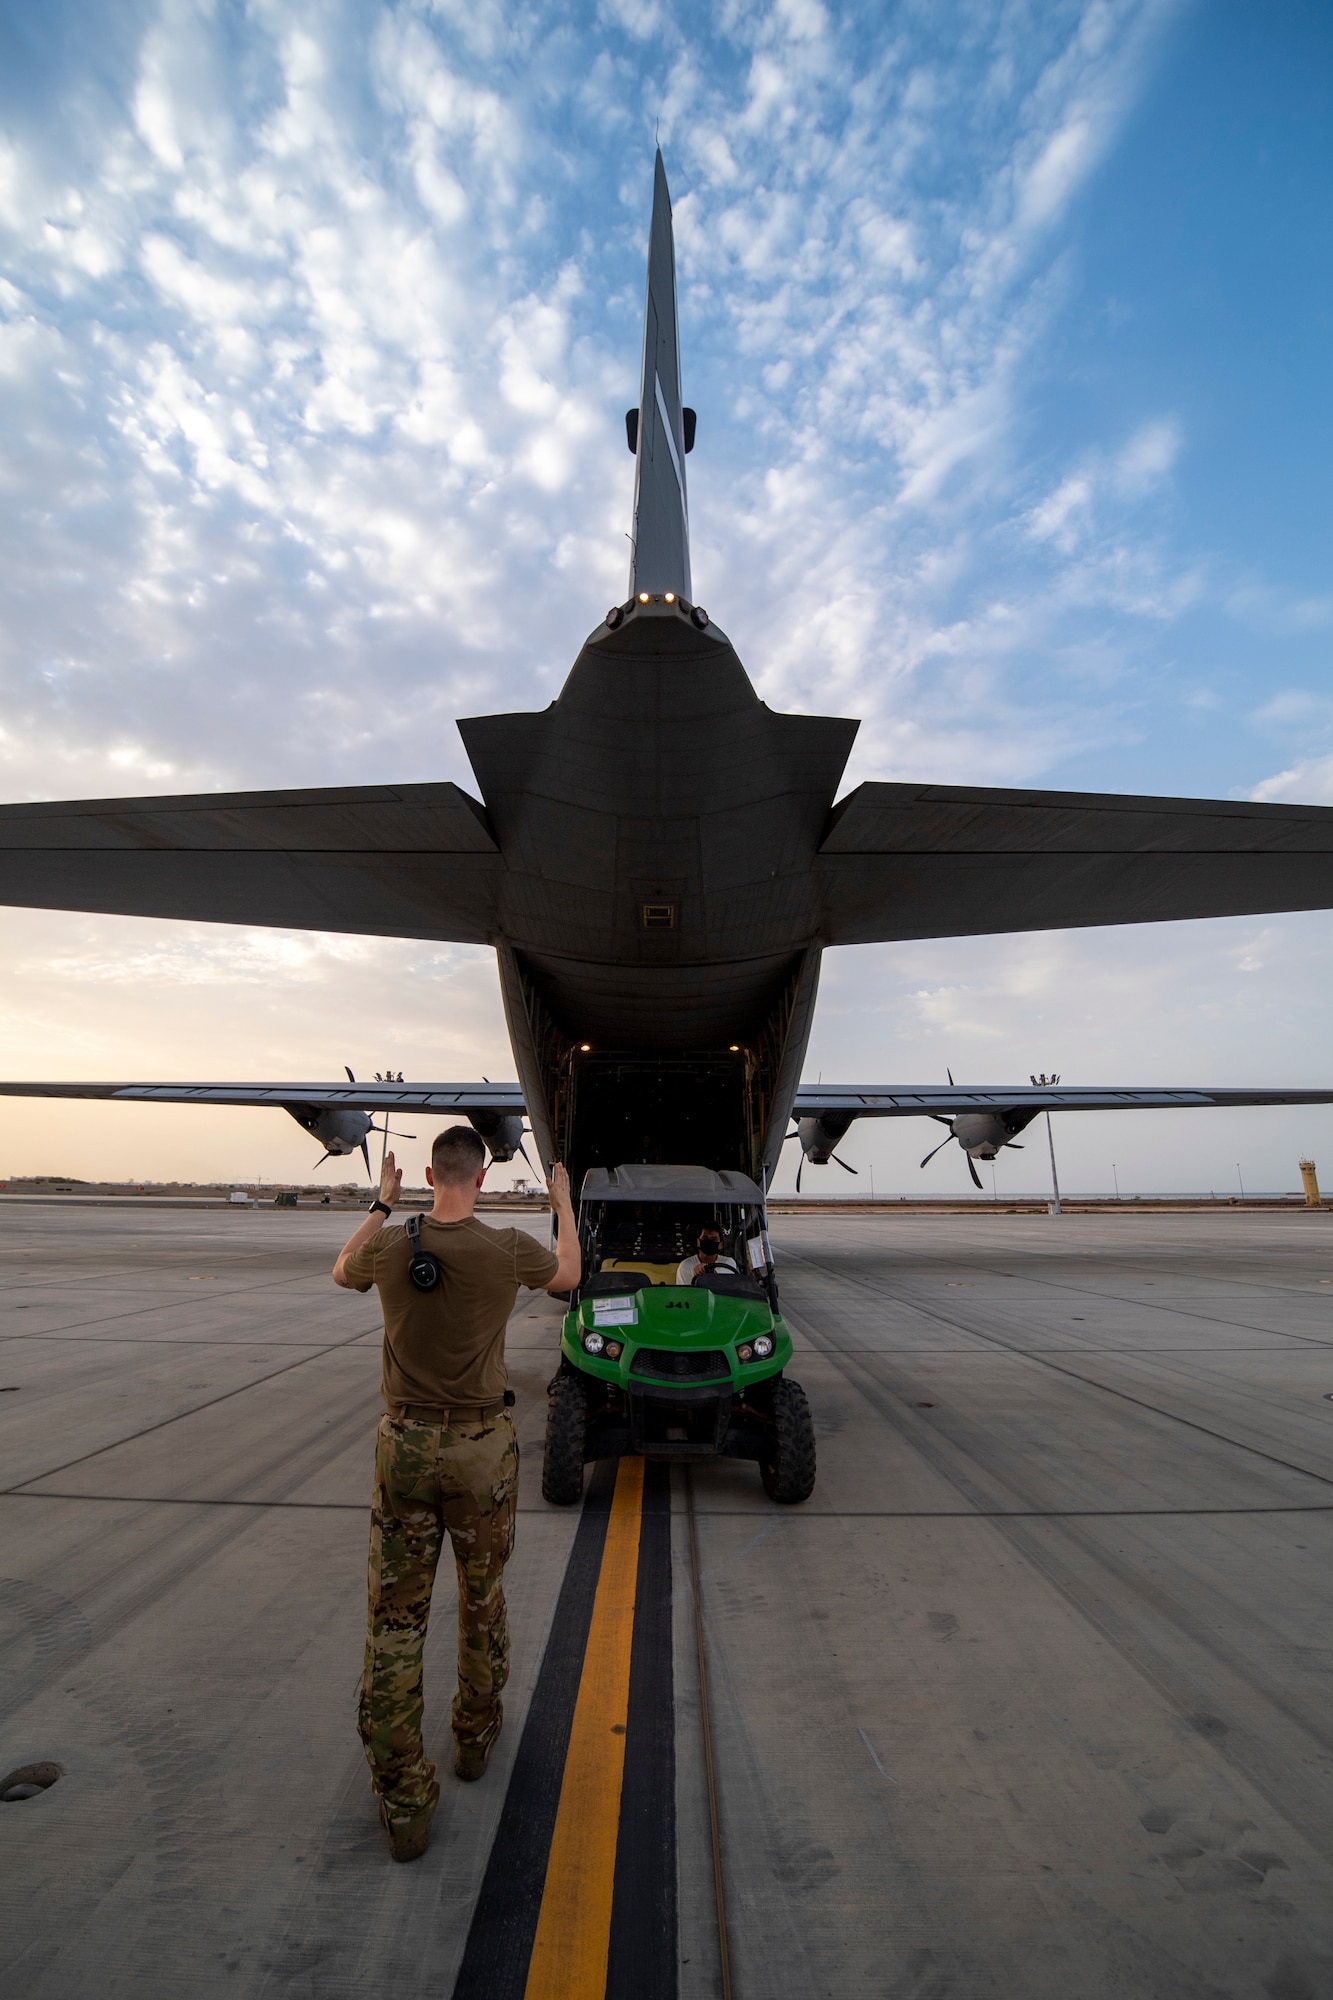 A U.S. Air Force 75th Expeditionary Airlift Squadron (EAS) loadmaster directs a vehicle onto a C-130J Super Hercules at Camp Lemonnier, Djibouti, June 28, 2020. The 75th EAS provides strategic airlift capabilities across the Combined Joint Task Force - Horn of Africa (CJTF-HOA) area of responsibility. (U.S. Air Force photo by Tech. Sgt. Christopher Ruano)